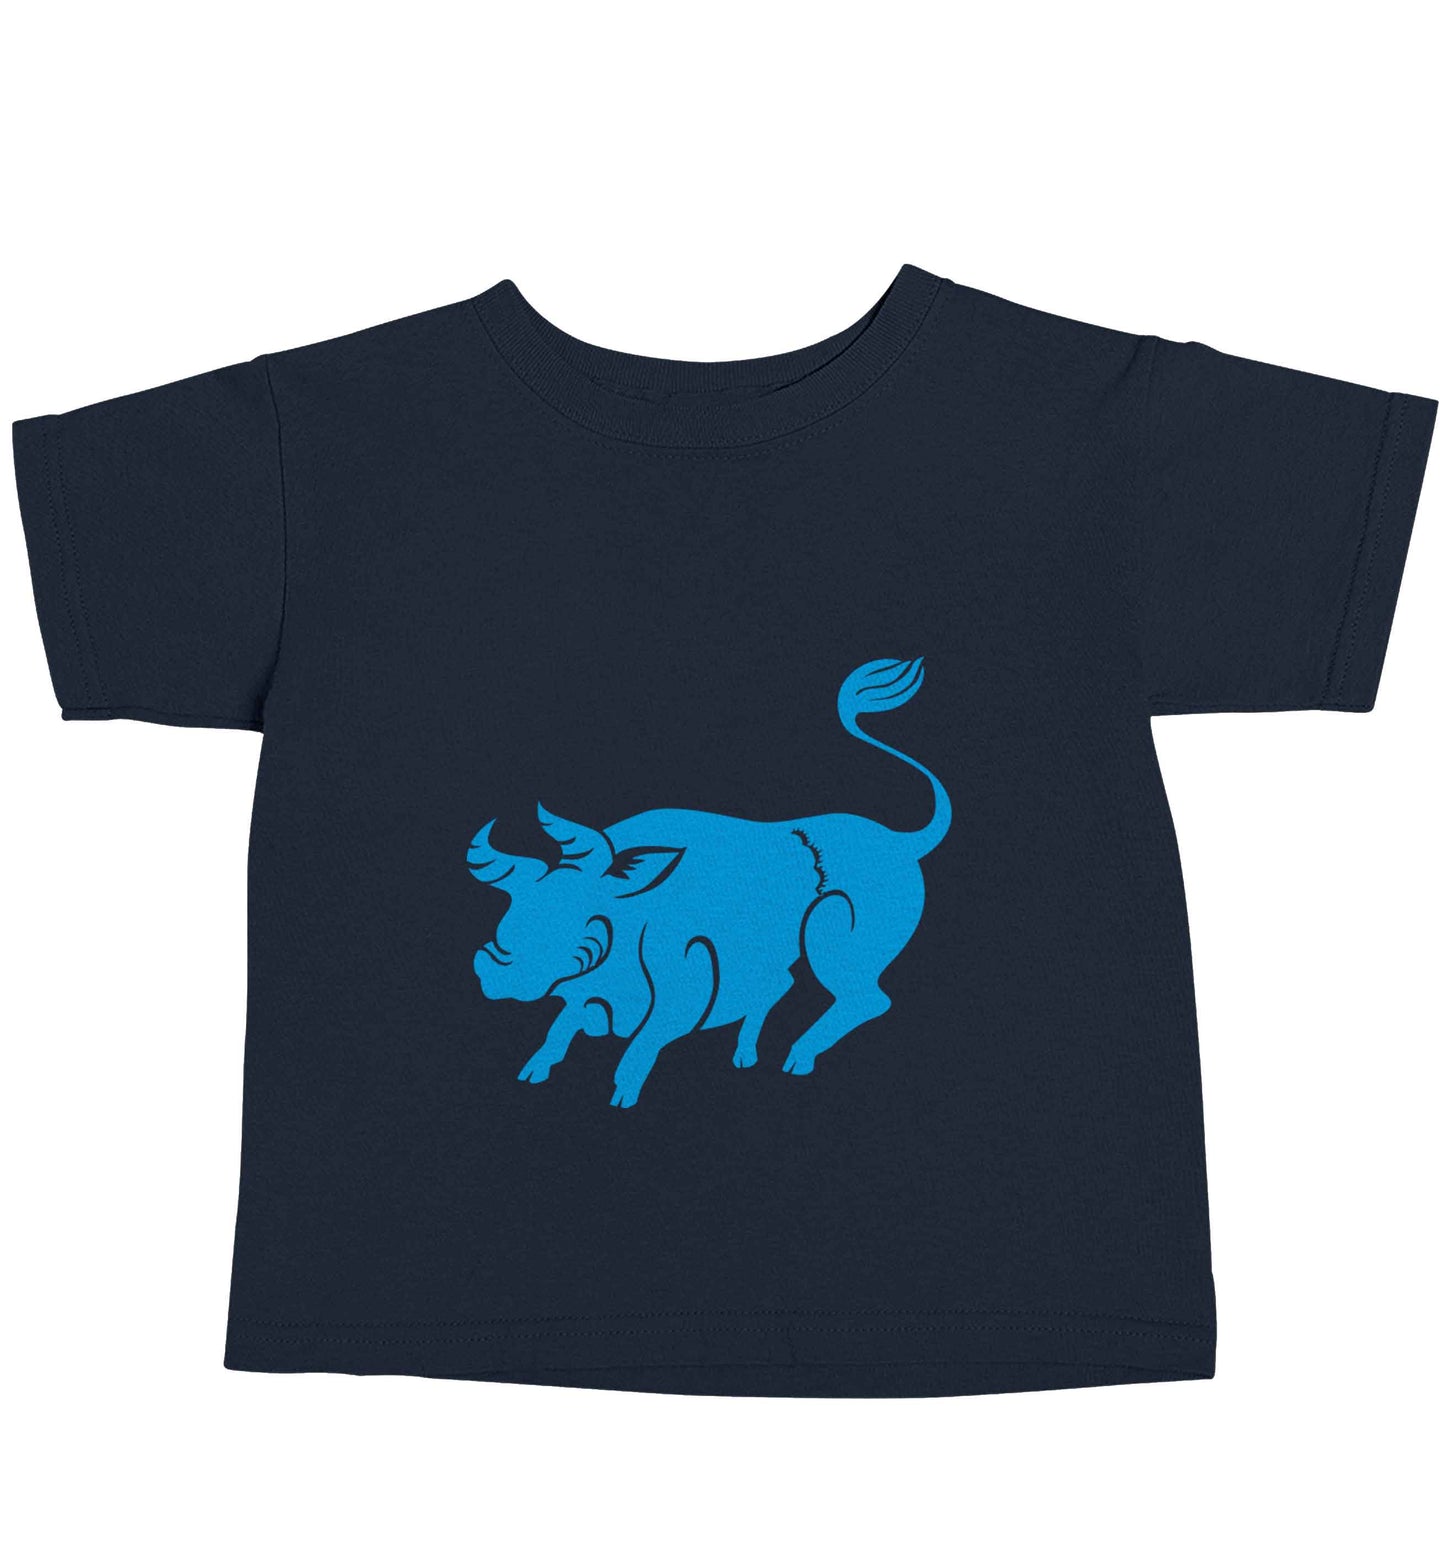 Blue ox navy baby toddler Tshirt 2 Years